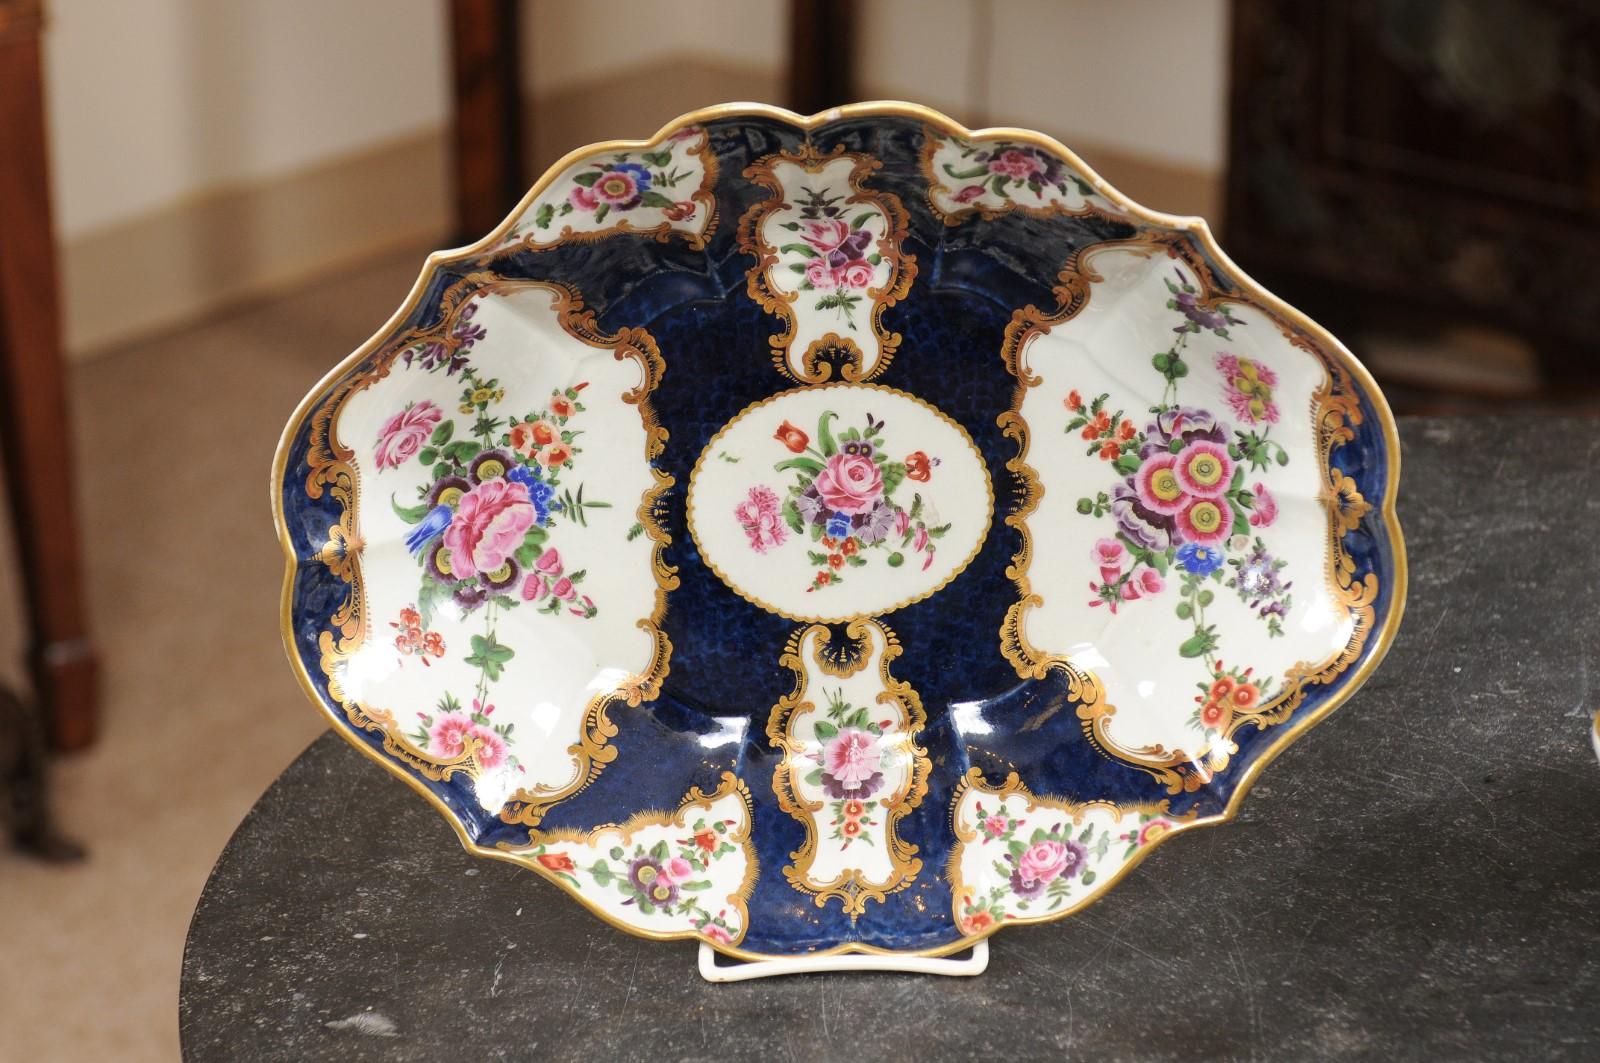 Pair of 18th Century English Worcester Porcelain Serving Dishes, “Dr. Wall” In Good Condition For Sale In Atlanta, GA